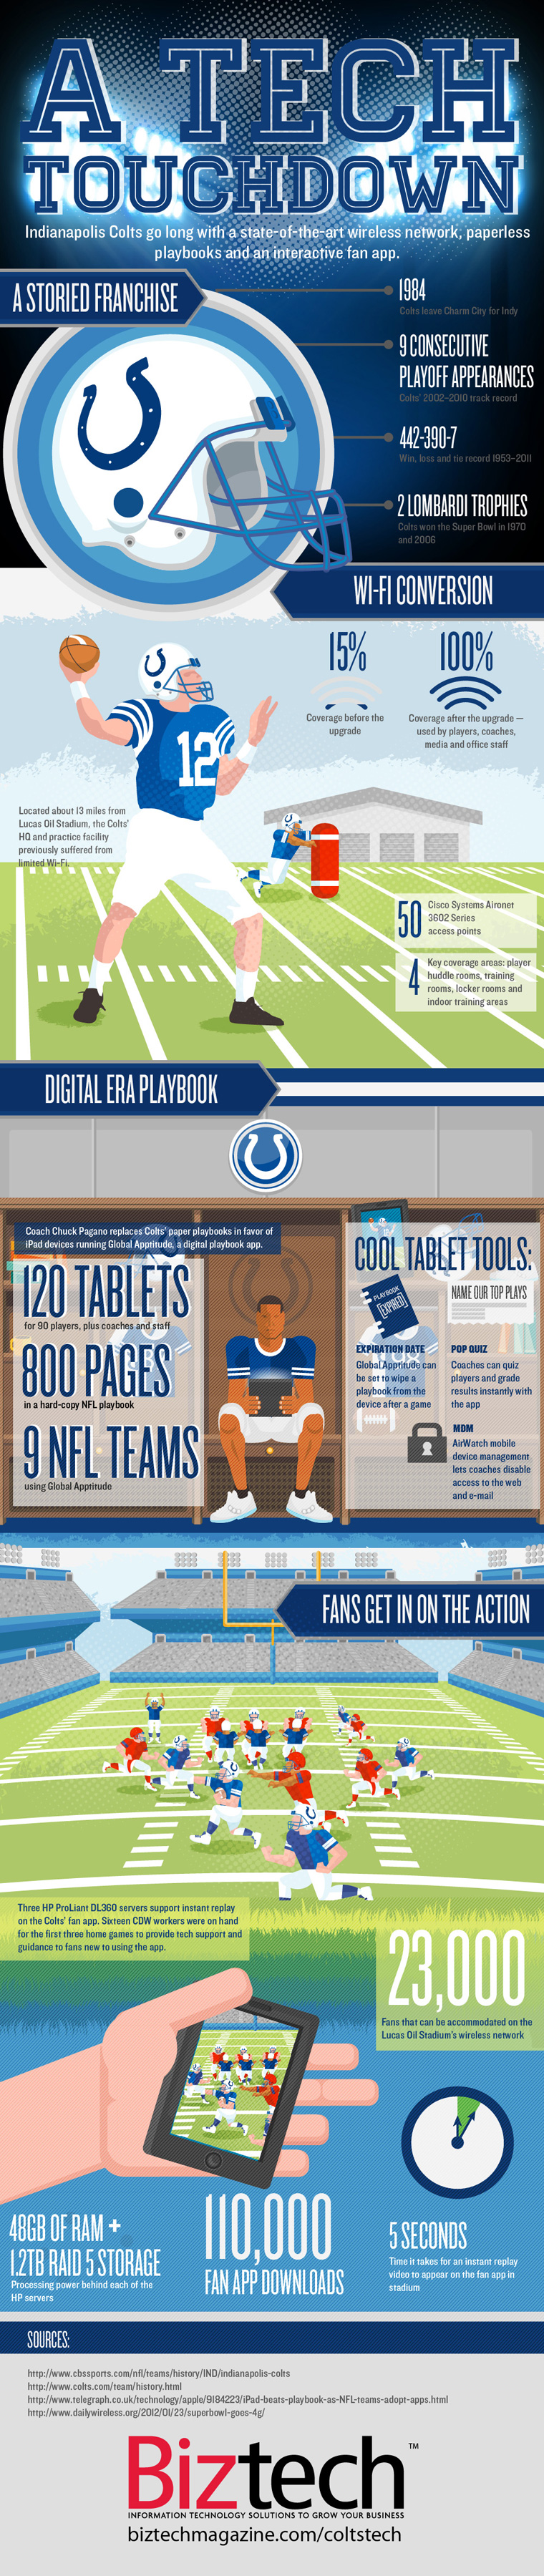 Colts Infographic